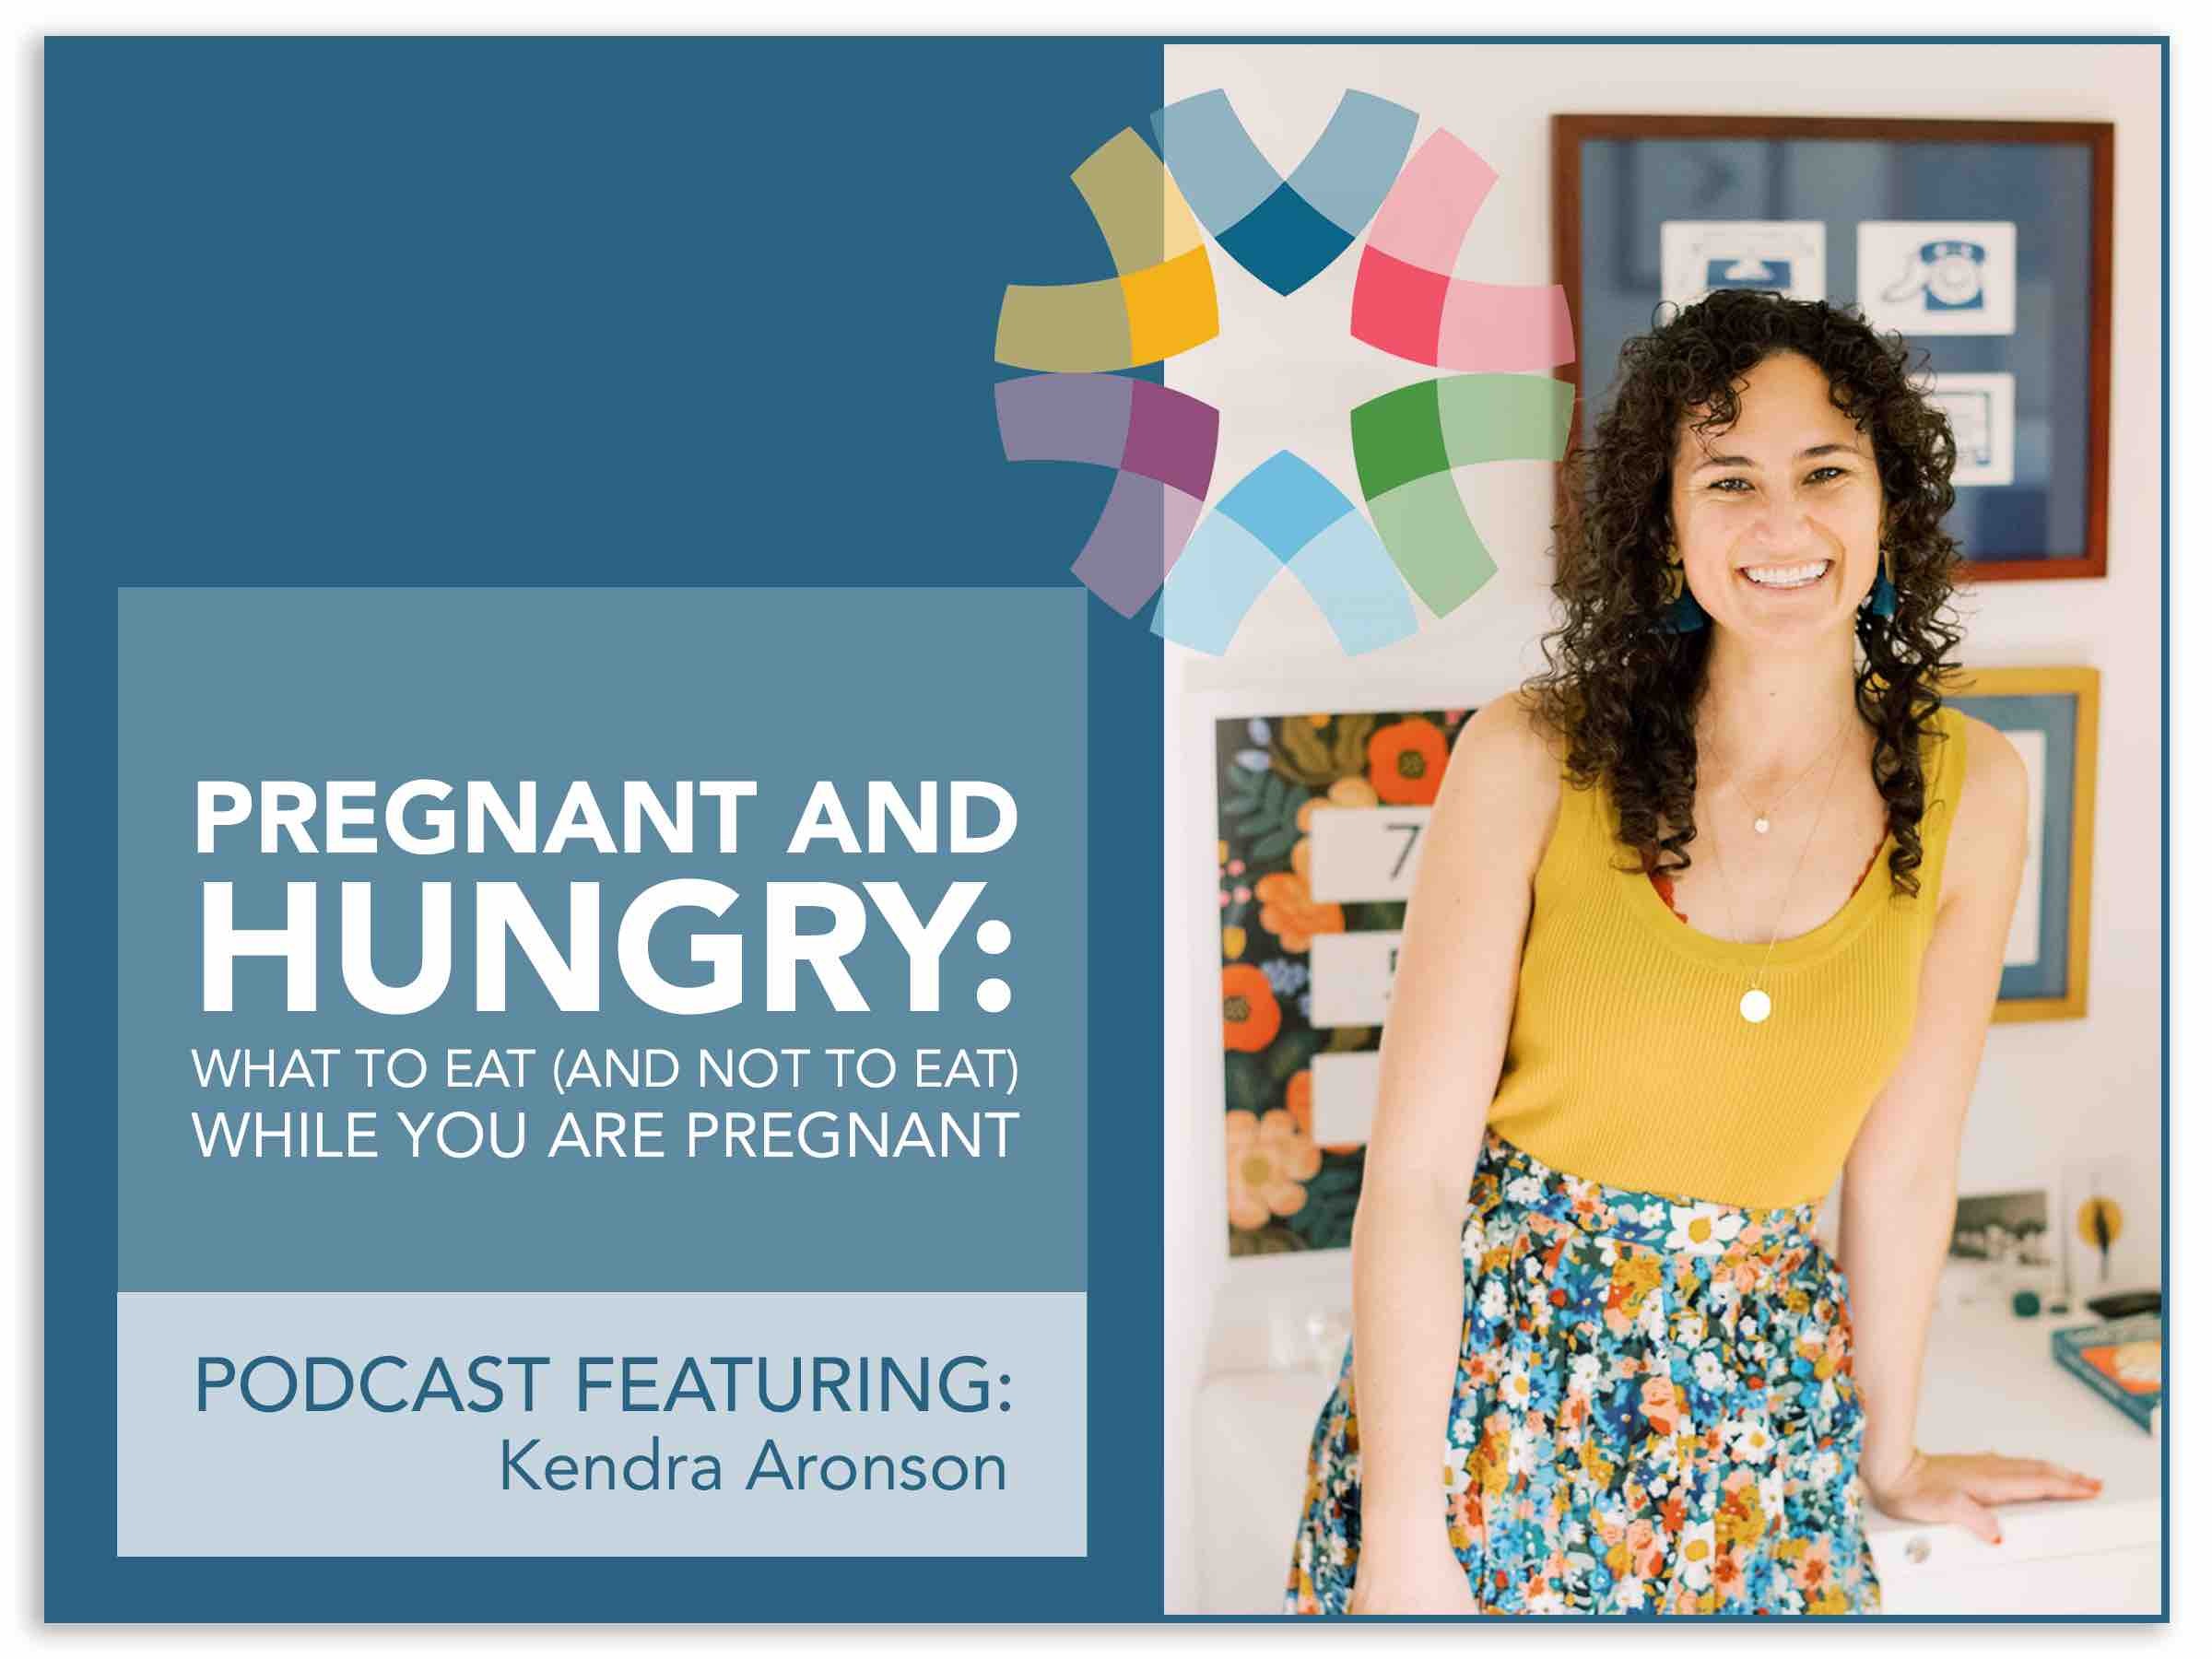 Pregnant and Hungry Founder Kendra Aronson shares how to eat during your surrogacy pregnancy